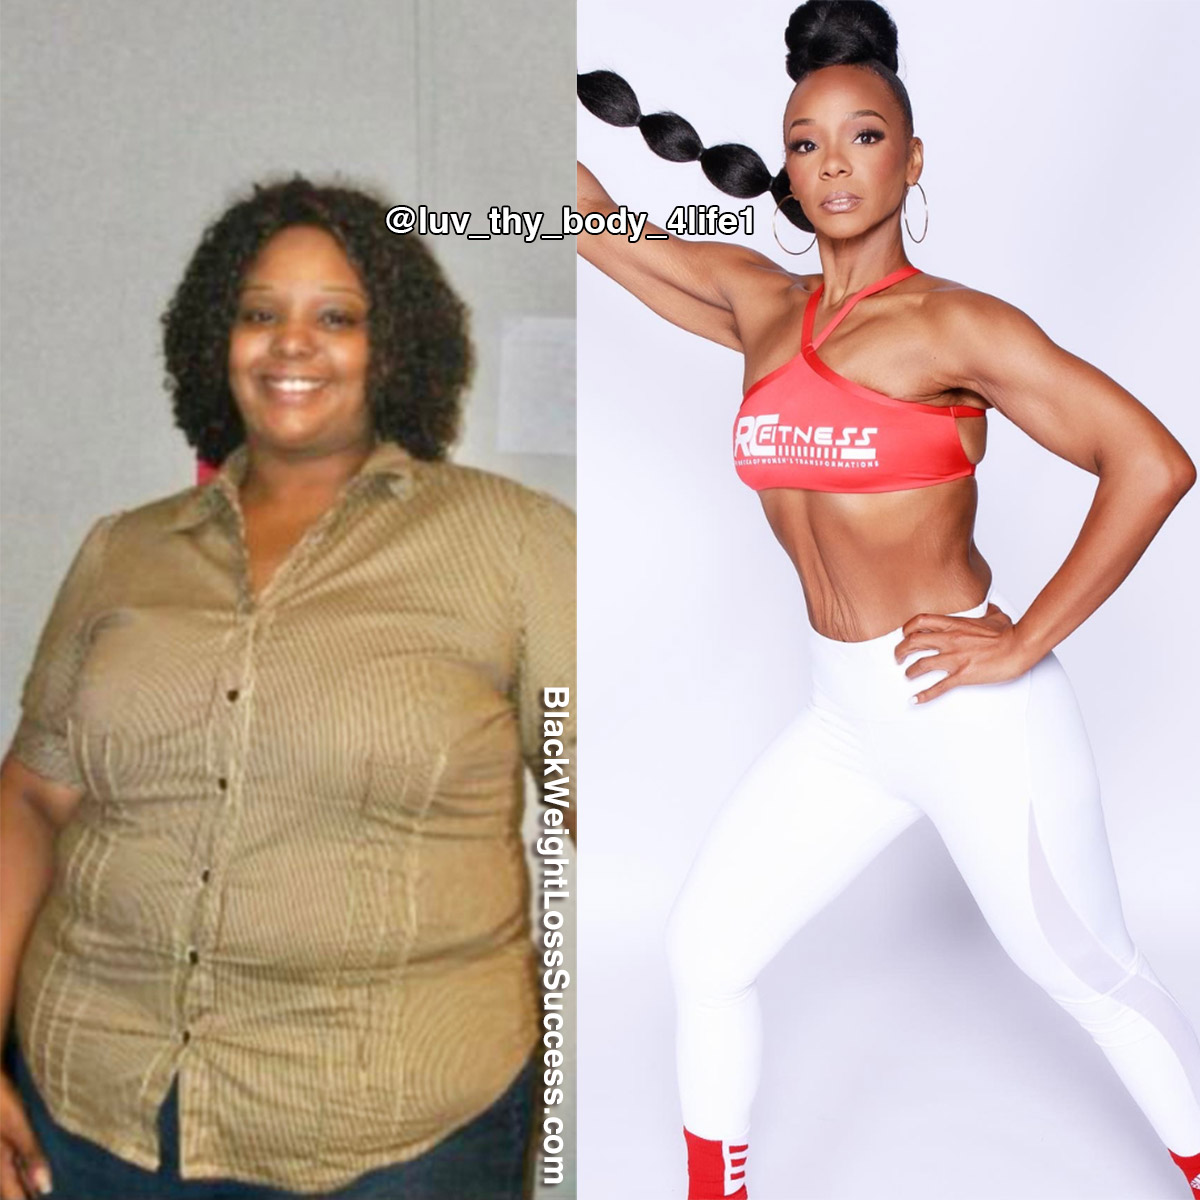 Heather before and after weight loss